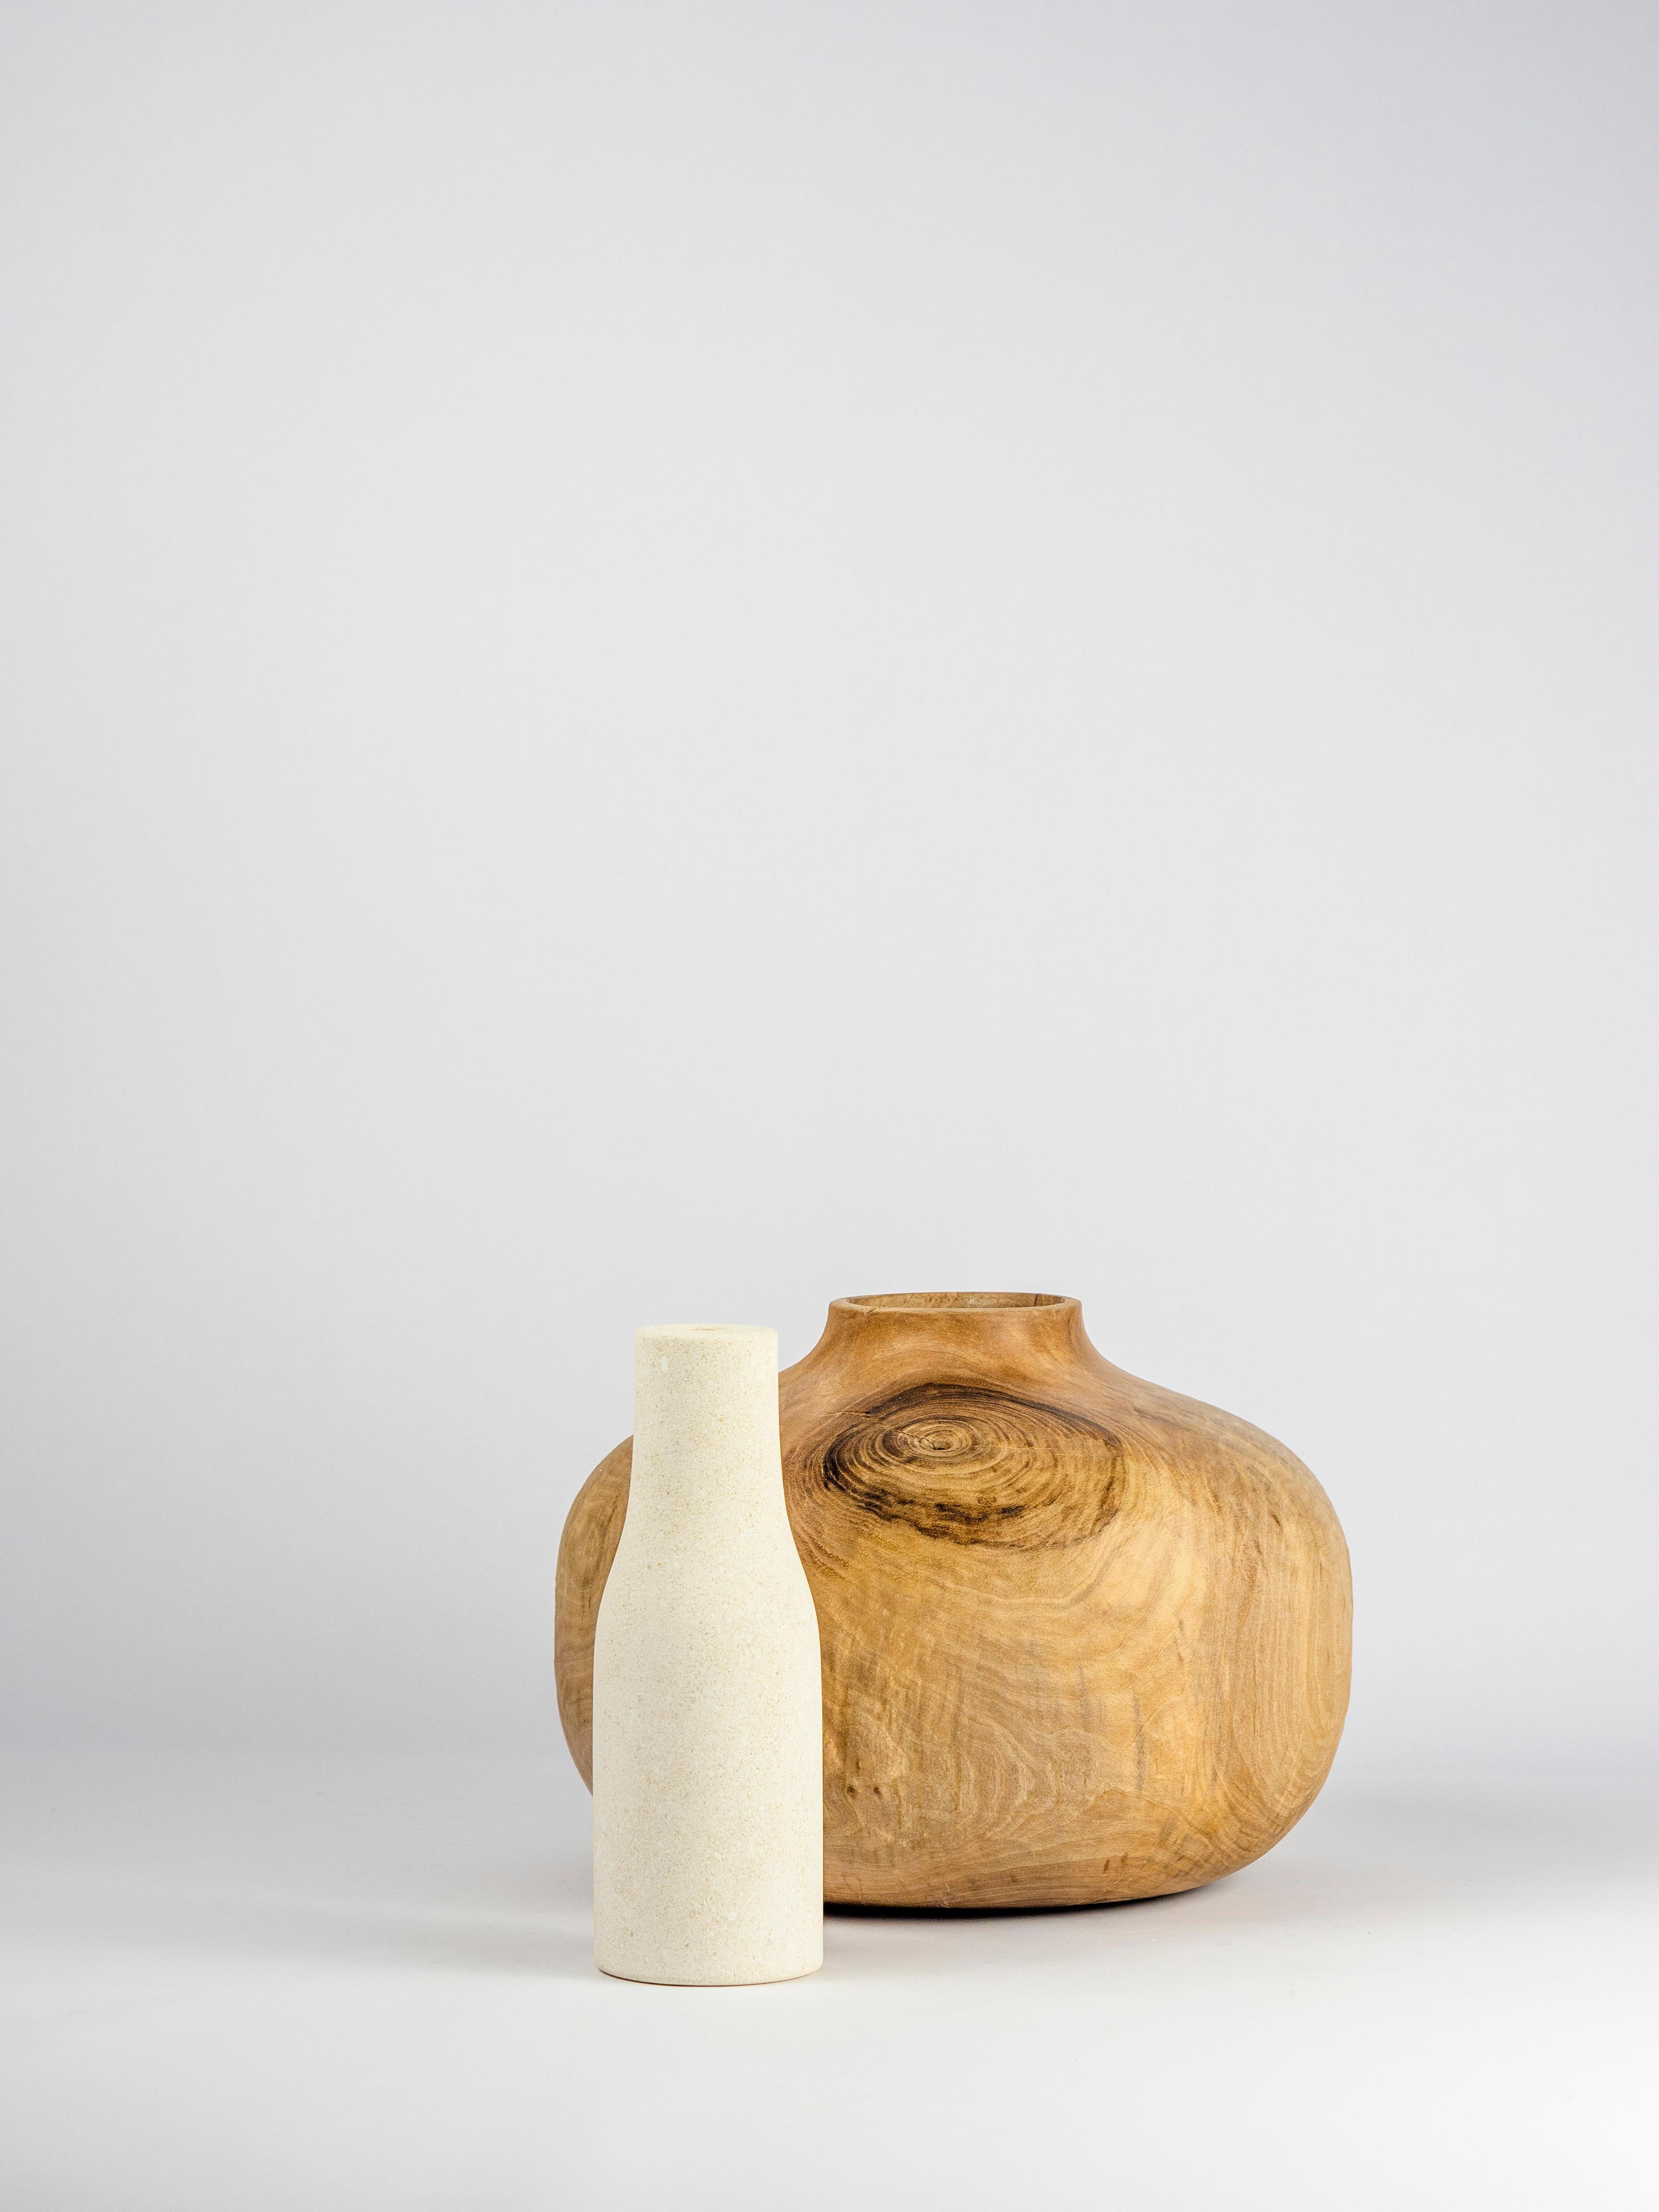 A collection of vases in Vicentina Stone and wood of Walnut, Beech, Alder and Chestnut that comes from the theme of the 